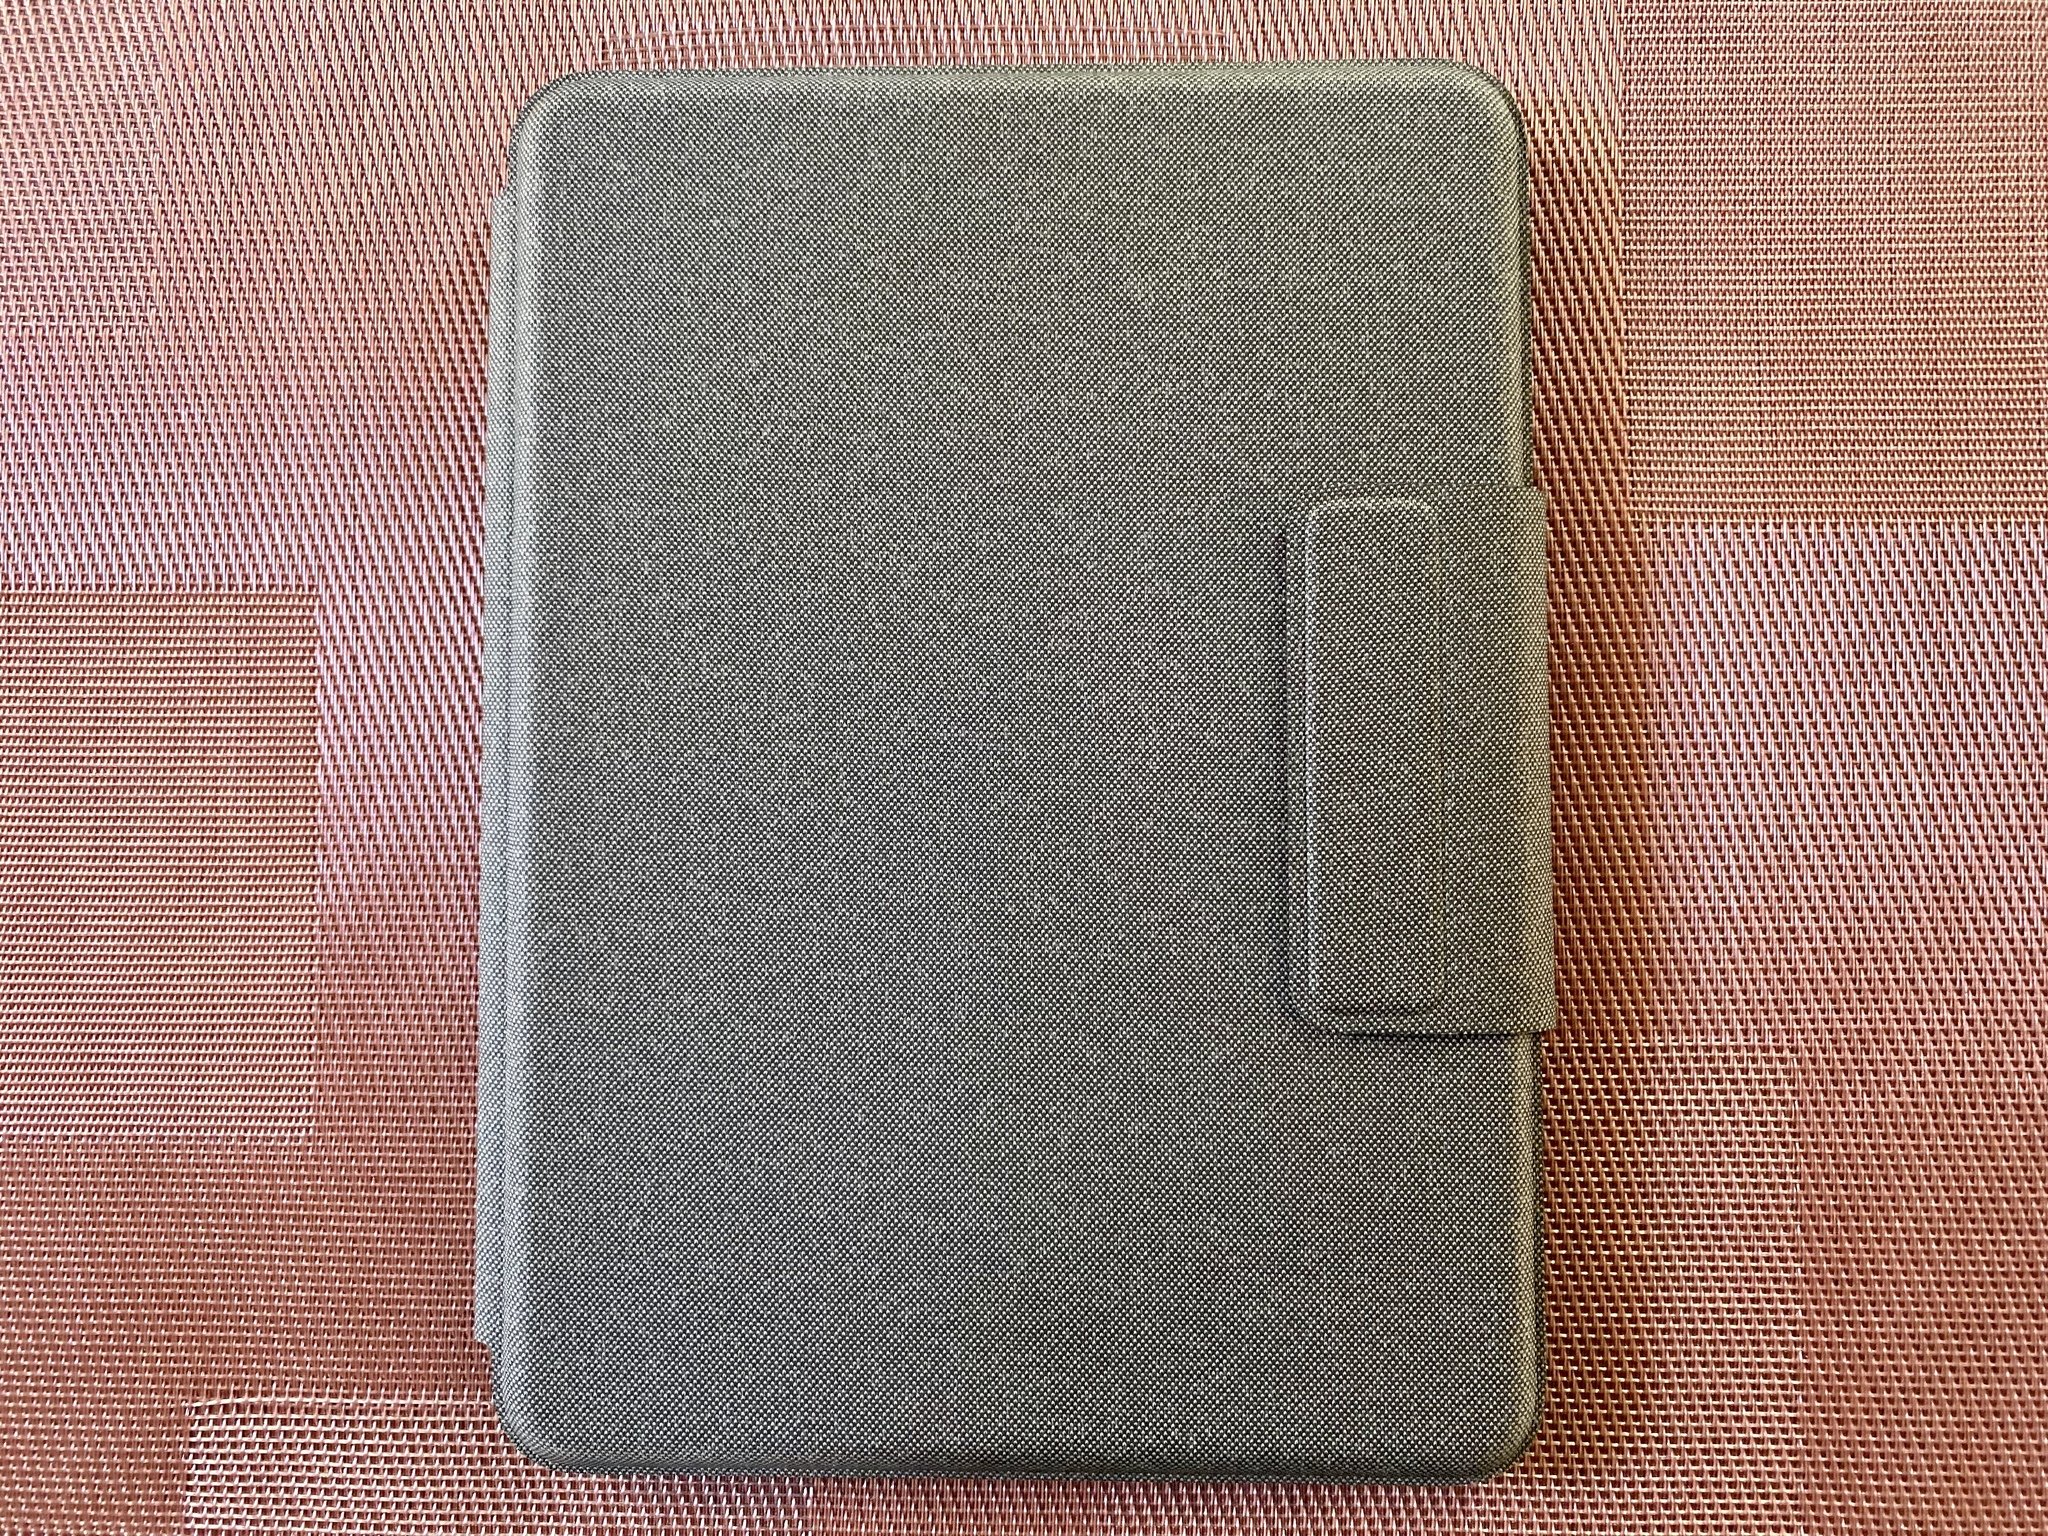 Logitech Folio Touch Closed Front